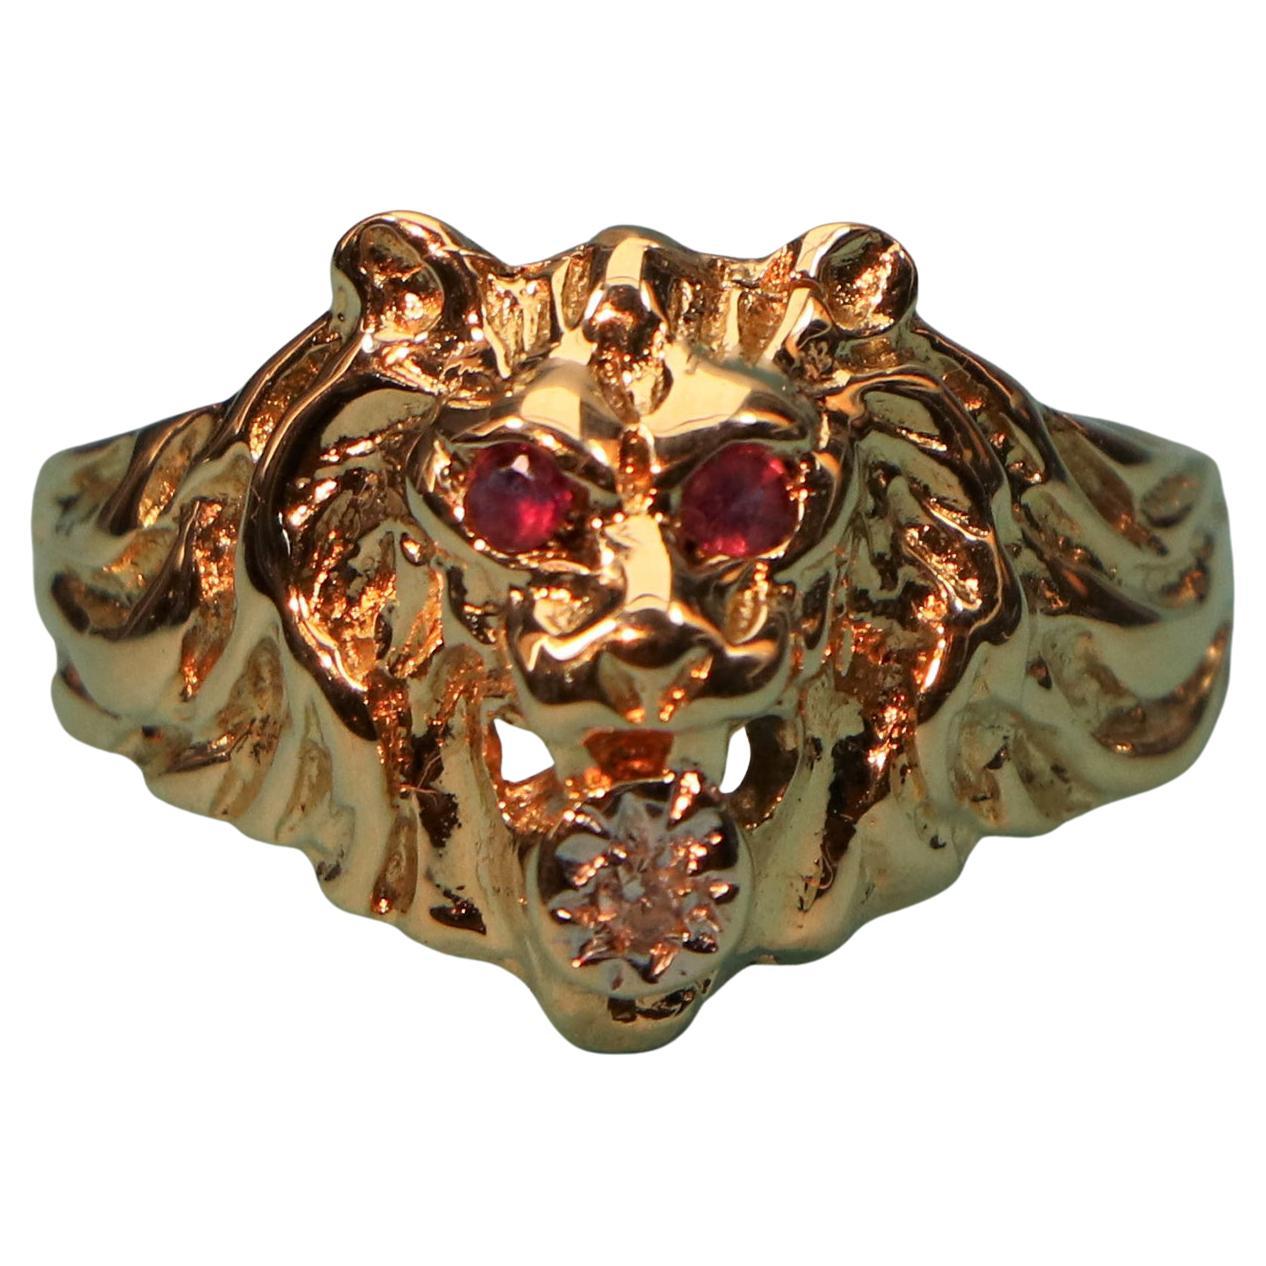 Impressive Lion Head Ring, Lions Ring, Made of 585 Gold, Diamond and Rubies For Sale